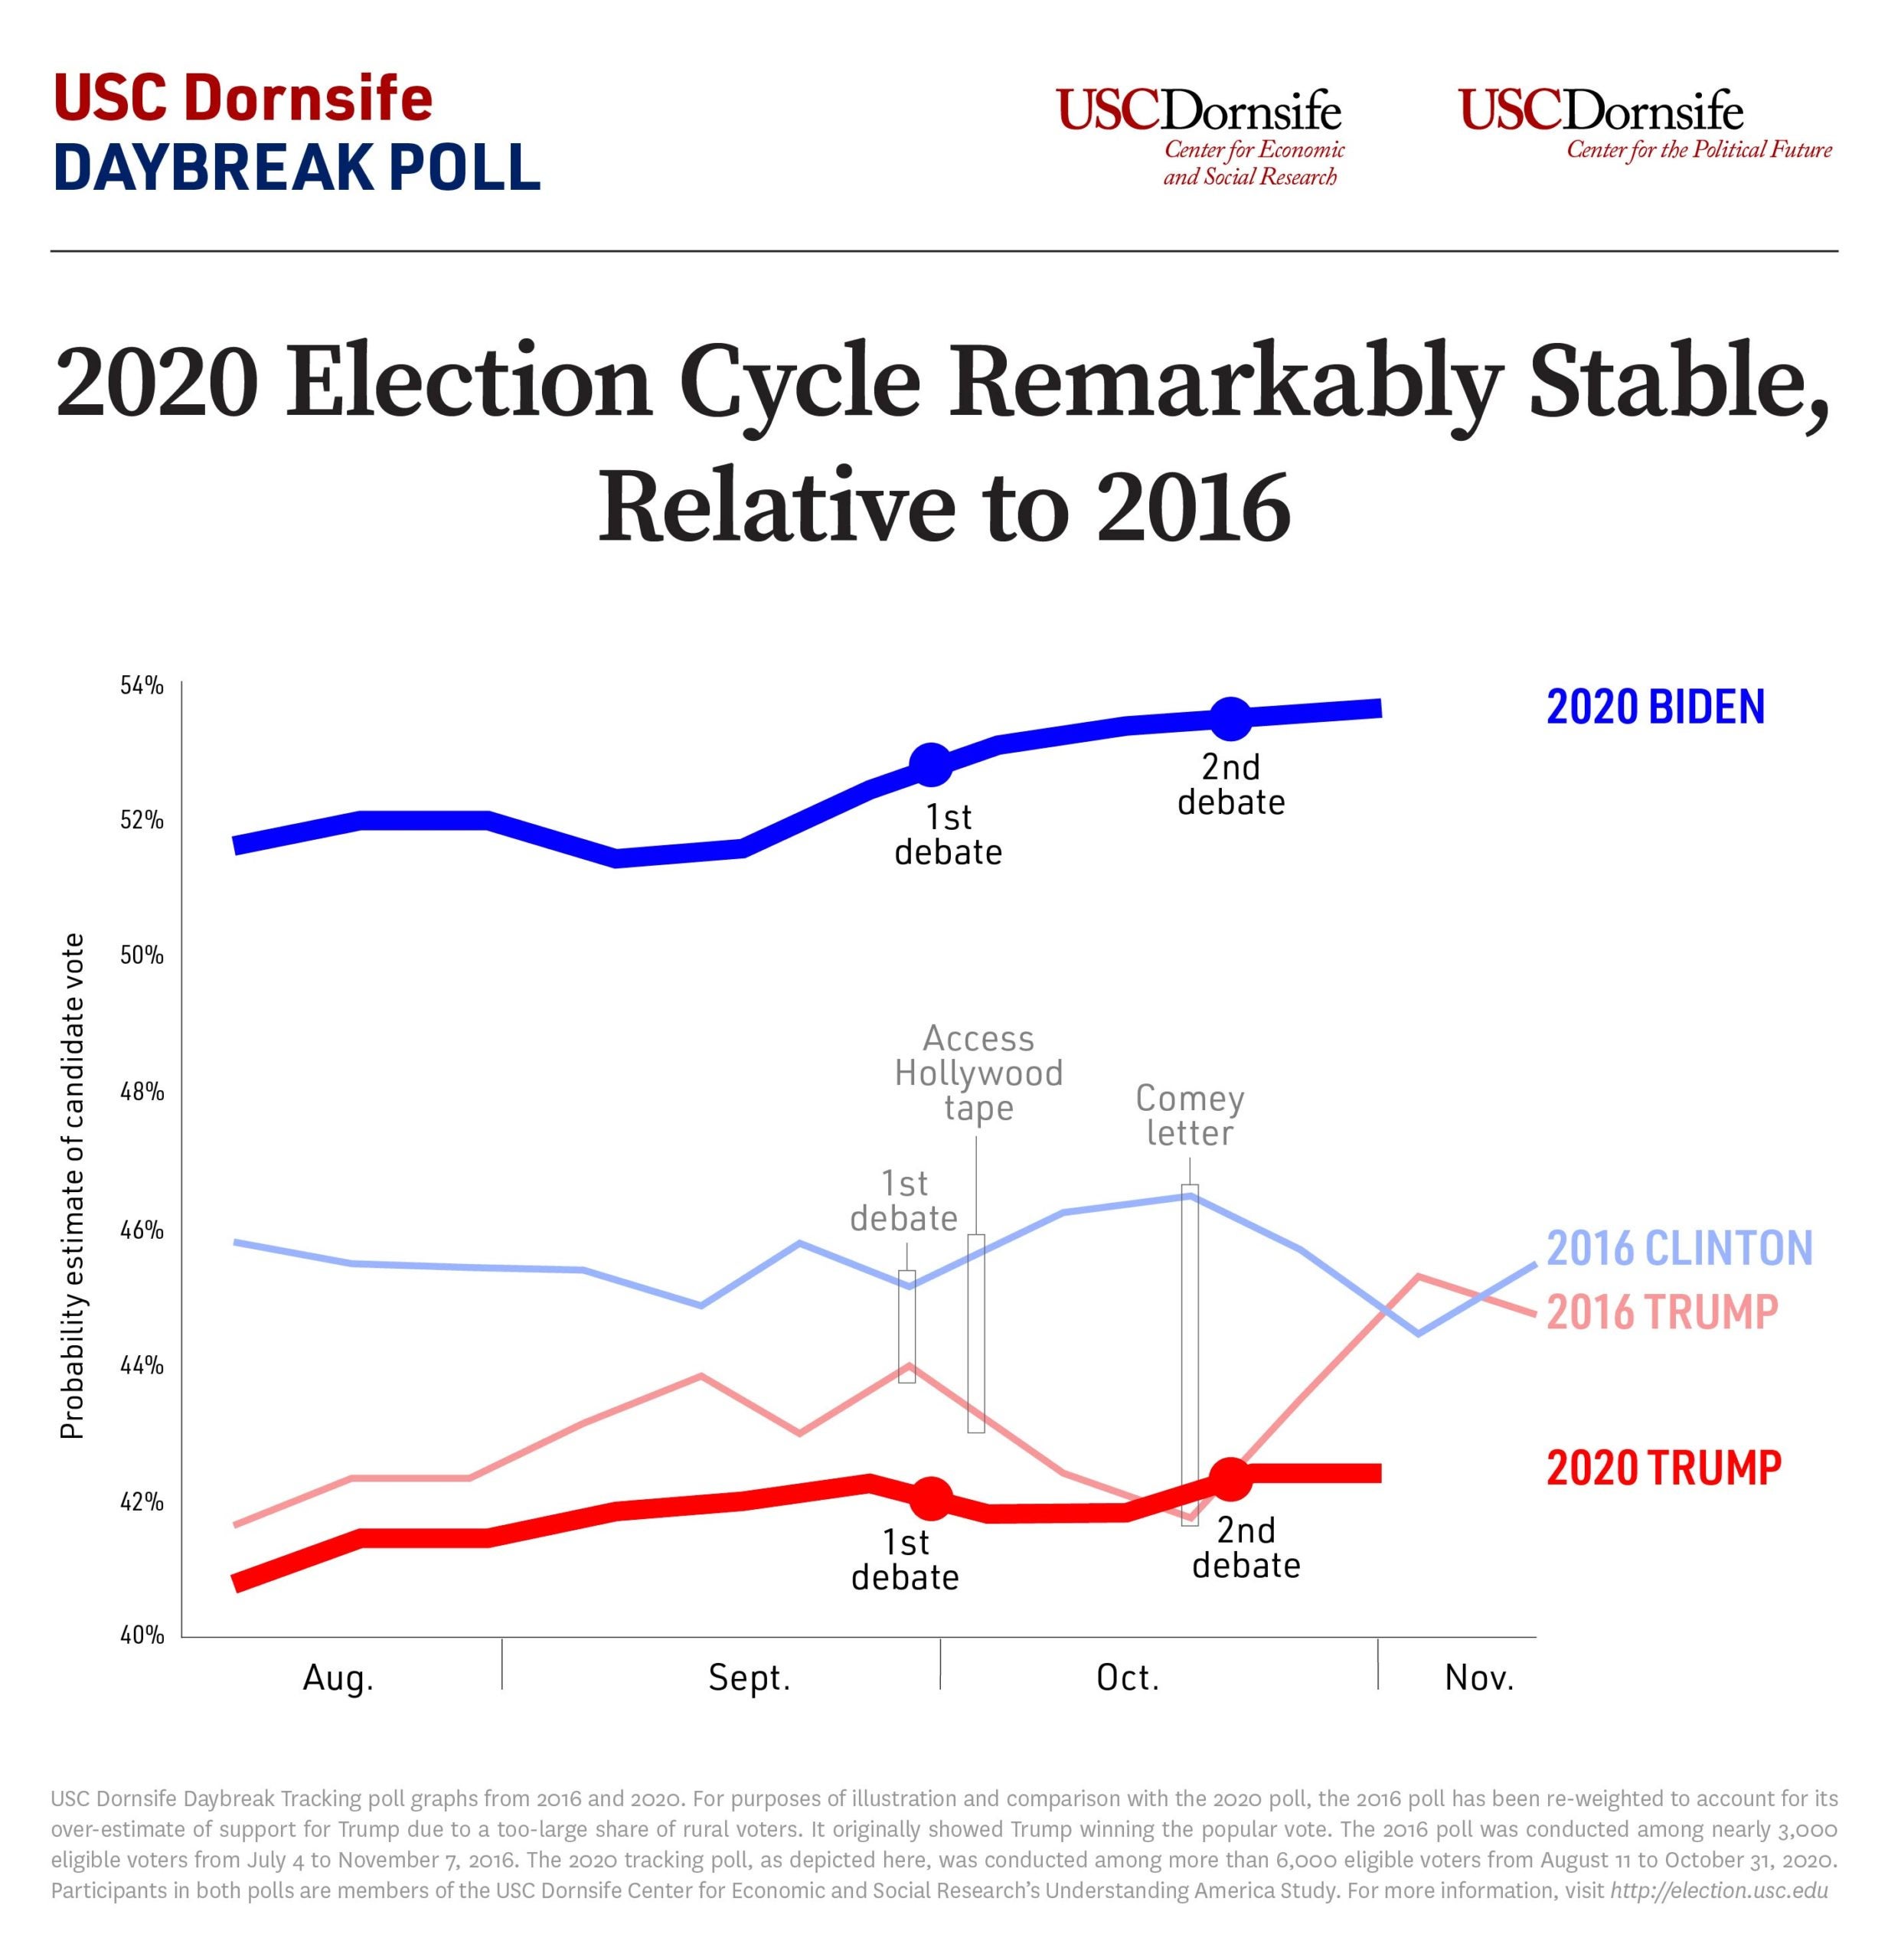 Final USC Dornsife Daybreak Poll: 2020 Election Cycle Remarkably Stable